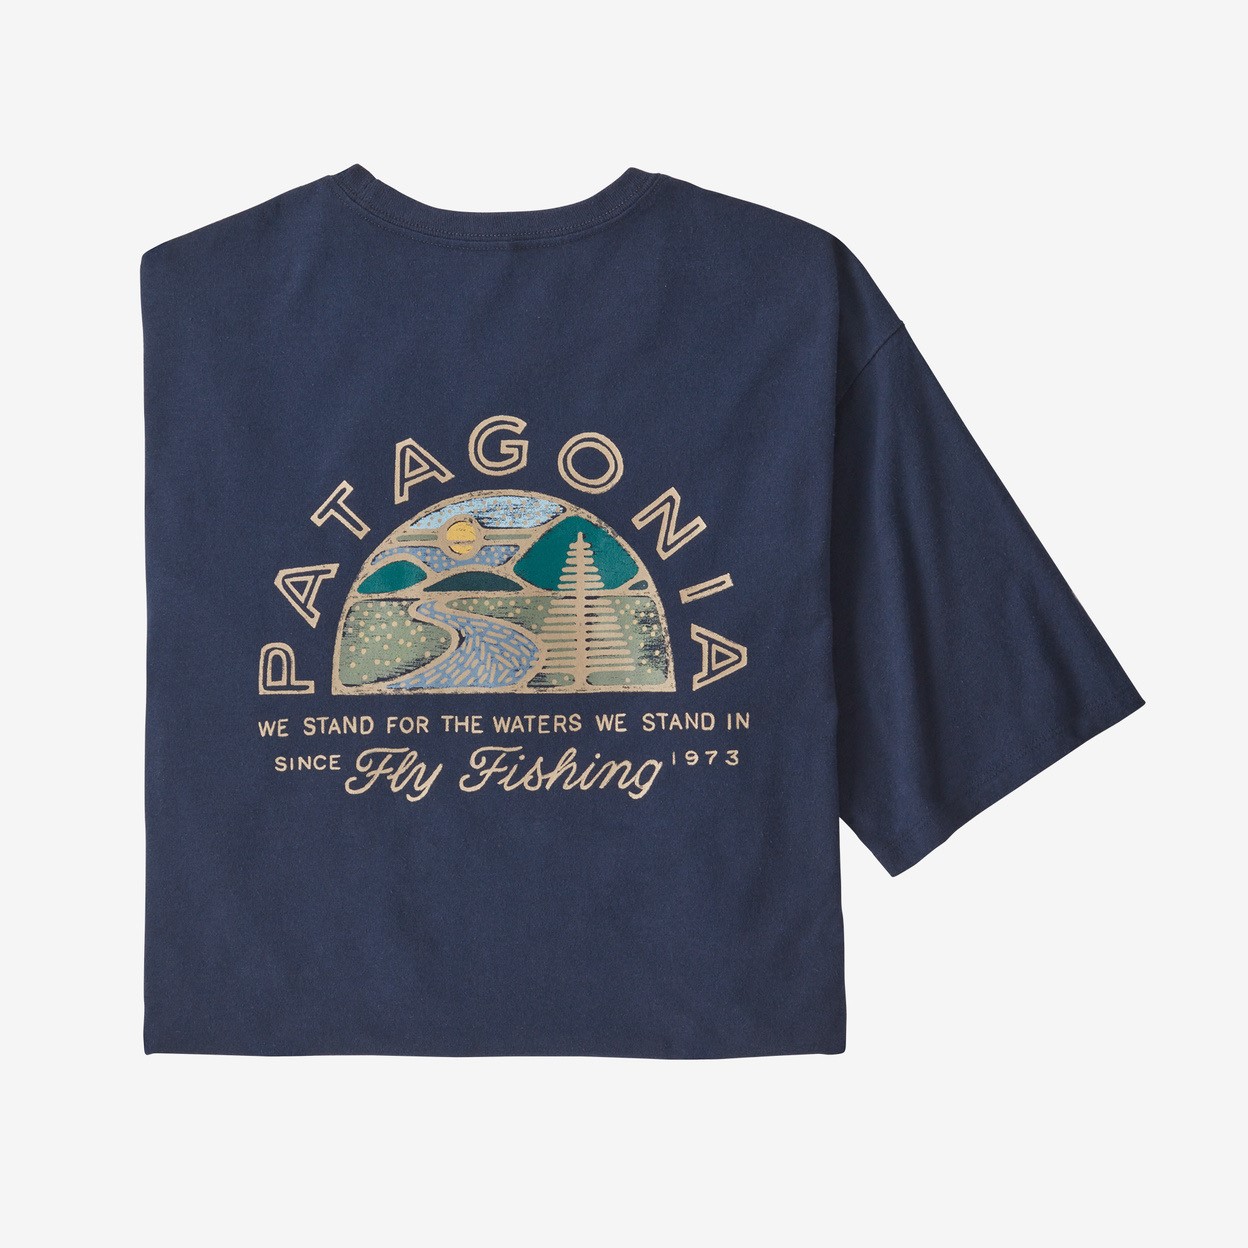 Patagonia M's Hatch Hour Responsibili-Tee - New Navy - Small